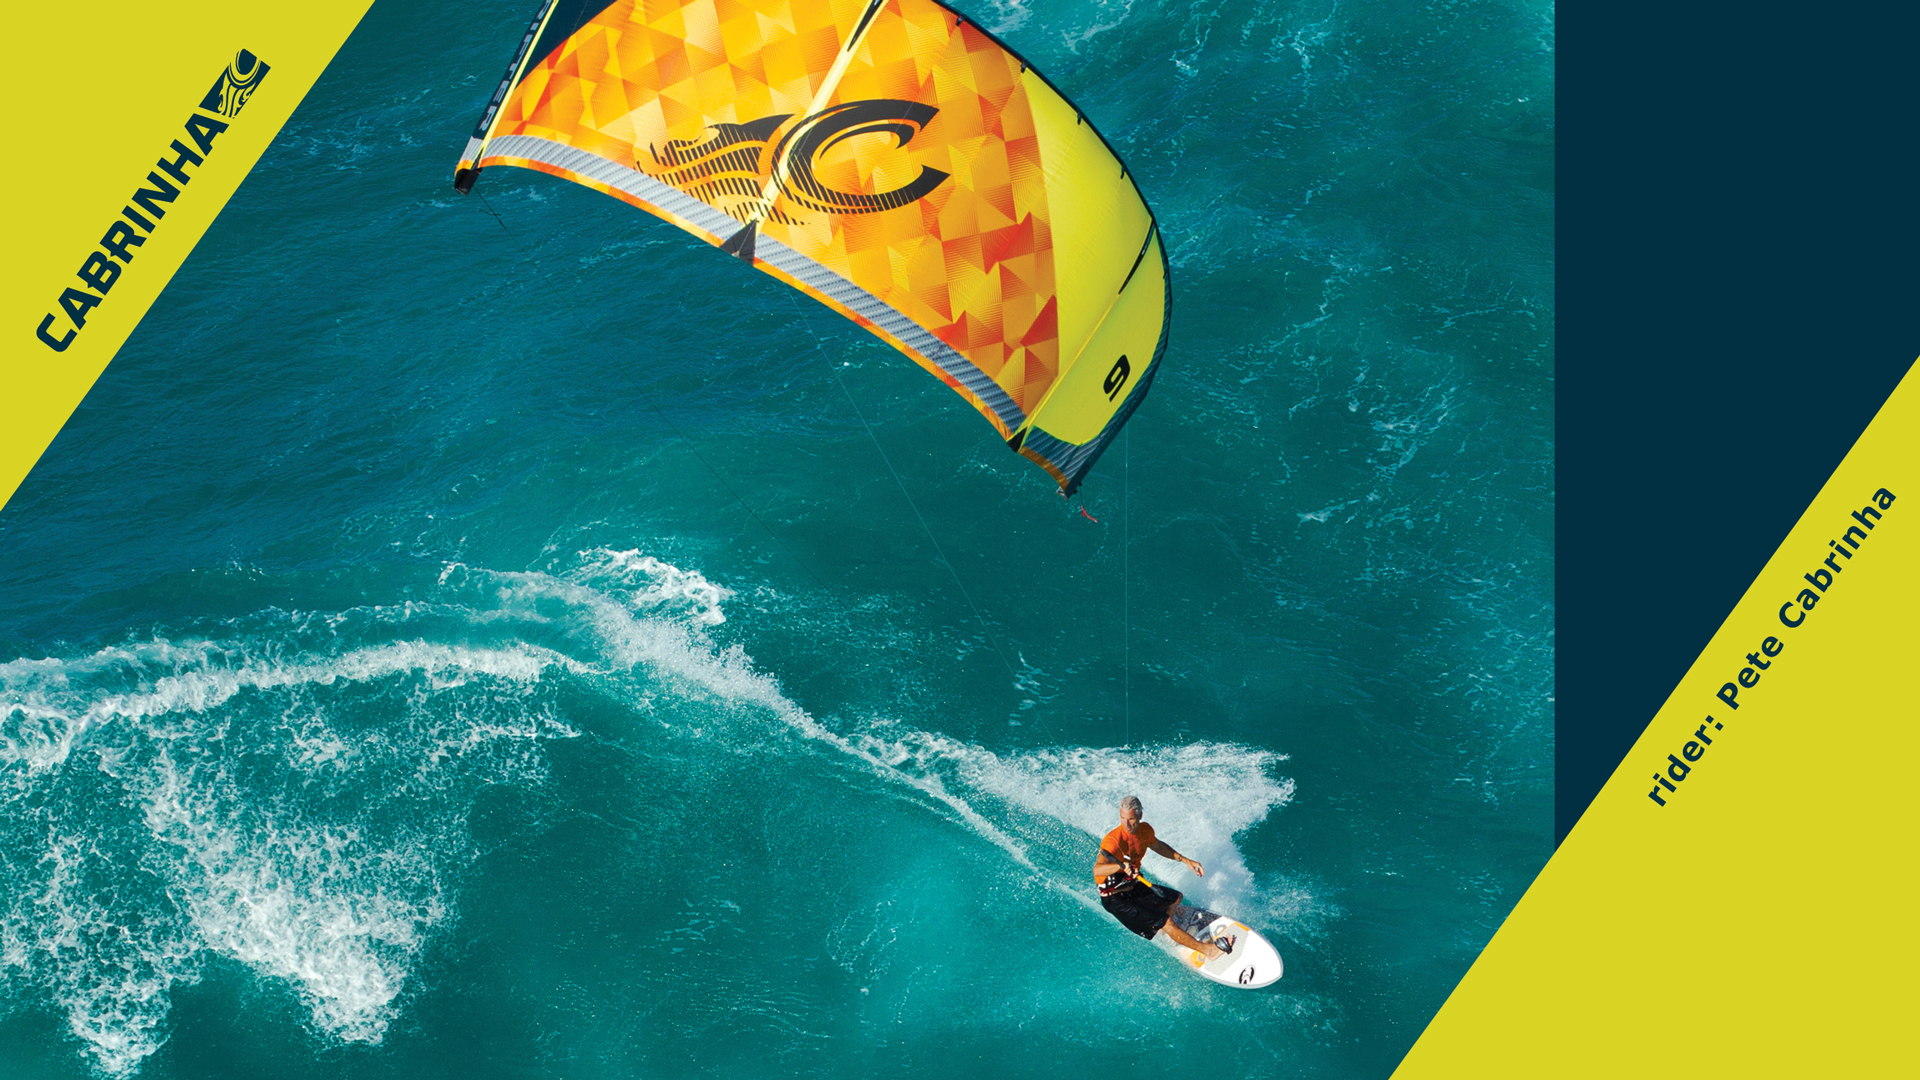 kitesurf wallpaper image - Pete Cabrinha on the 2015 drifter kite in Hawaii. - in resolution: High Definition - HD 16:9 1920 X 1080